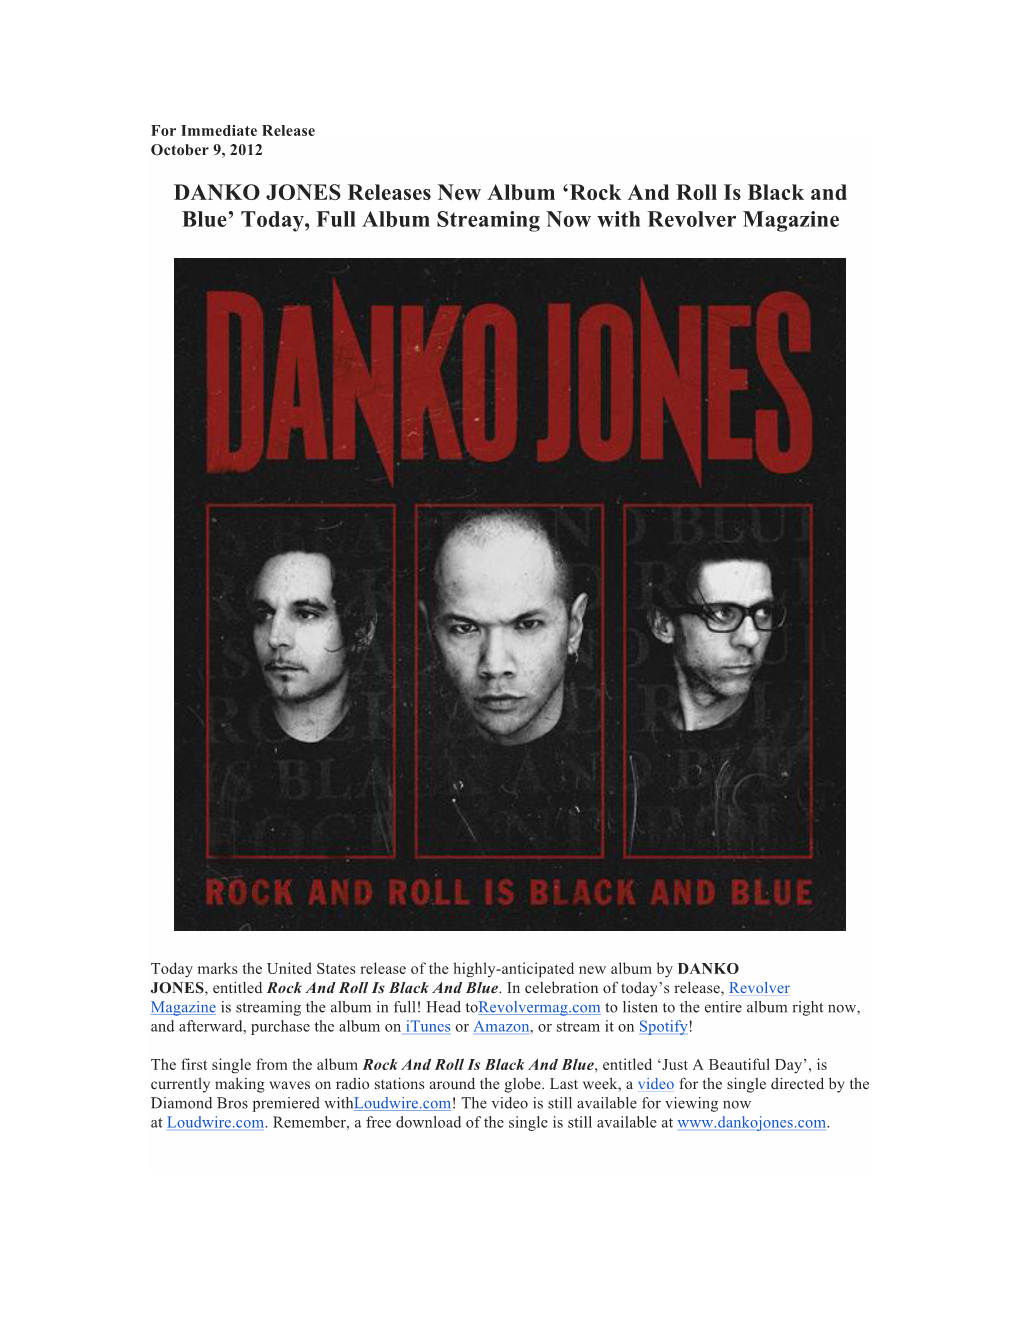 DANKO JONES Releases New Album ‘Rock and Roll Is Black and Blue’ Today, Full Album Streaming Now with Revolver Magazine